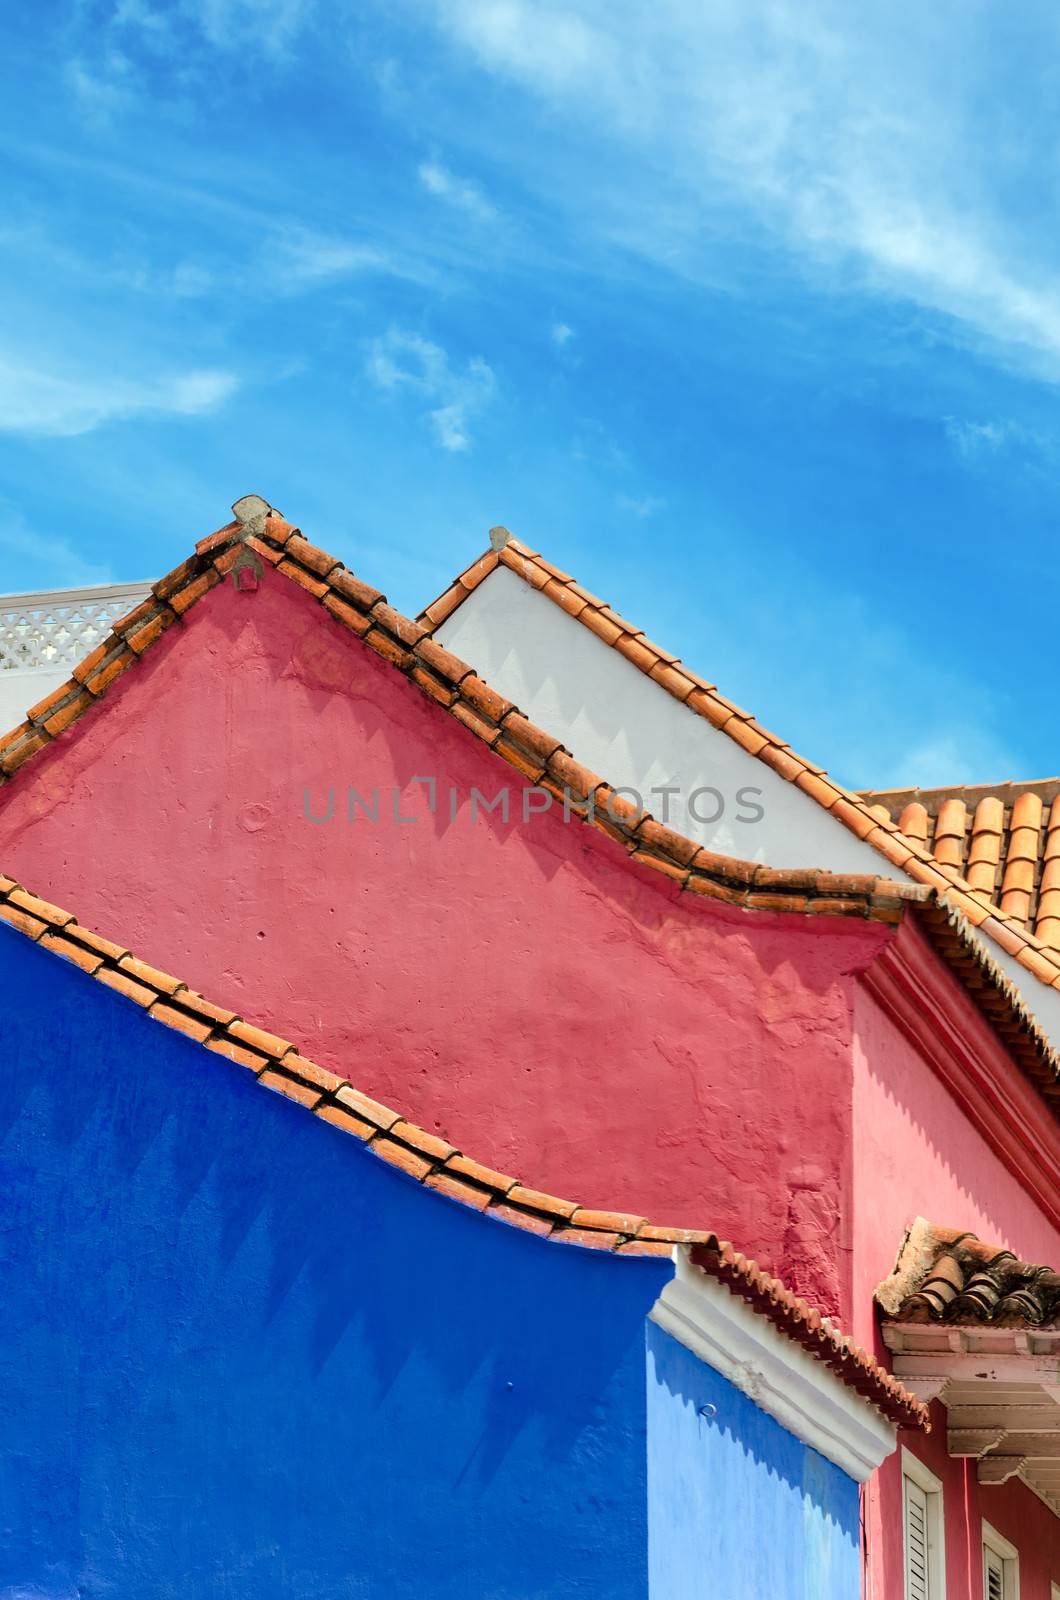 Blue, pink, and white colonial buildings in the old town of Cartagena, Colombia